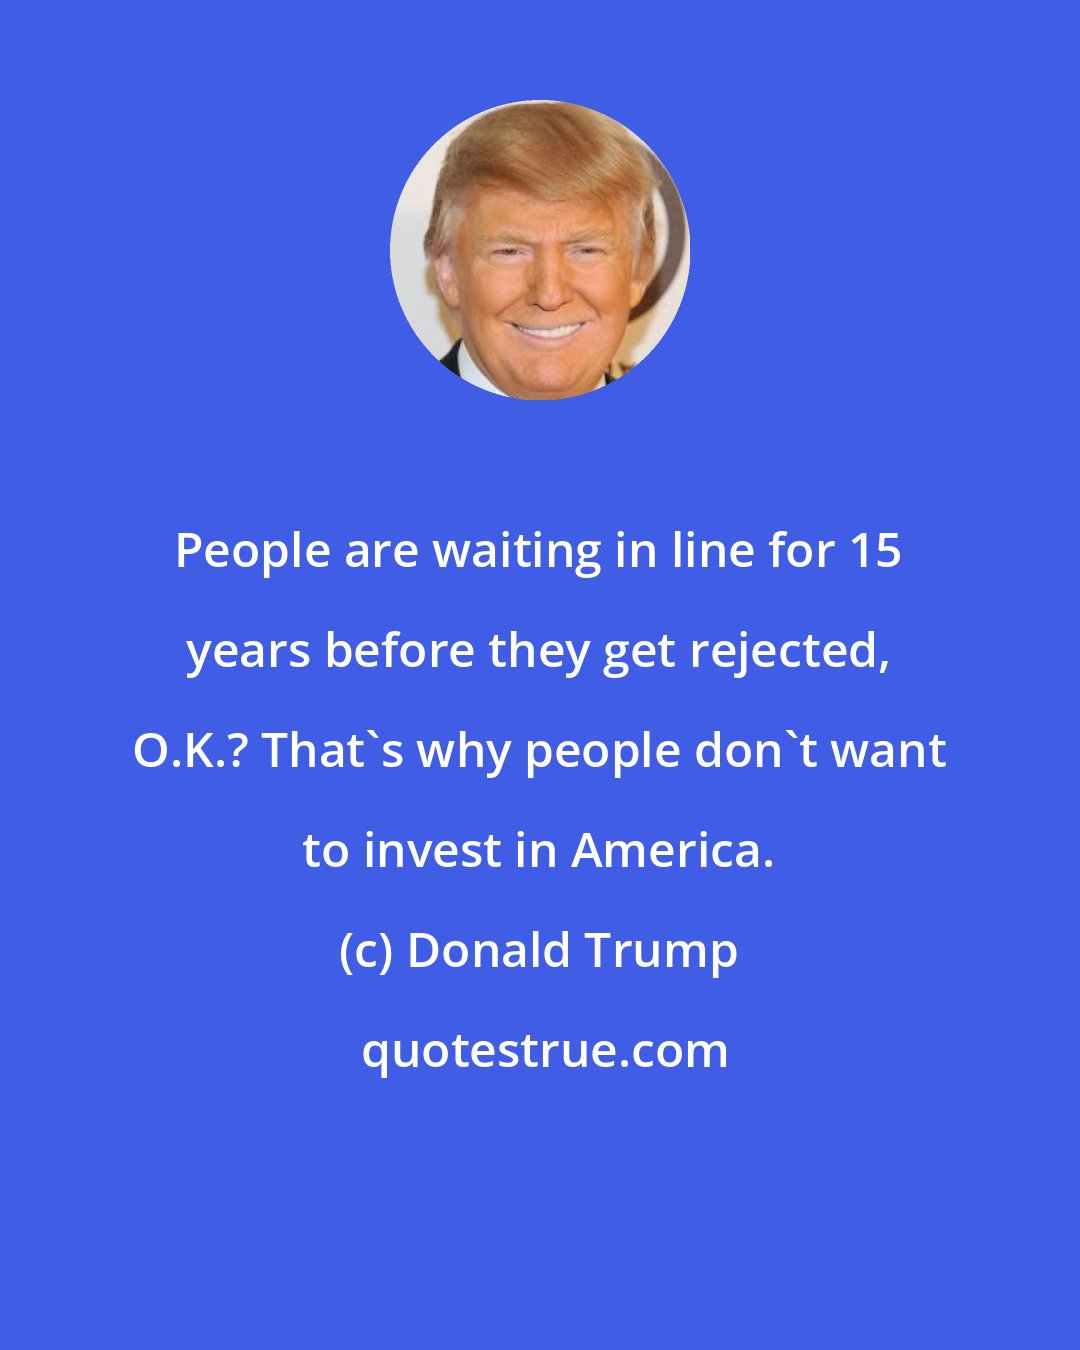 Donald Trump: People are waiting in line for 15 years before they get rejected, O.K.? That's why people don't want to invest in America.